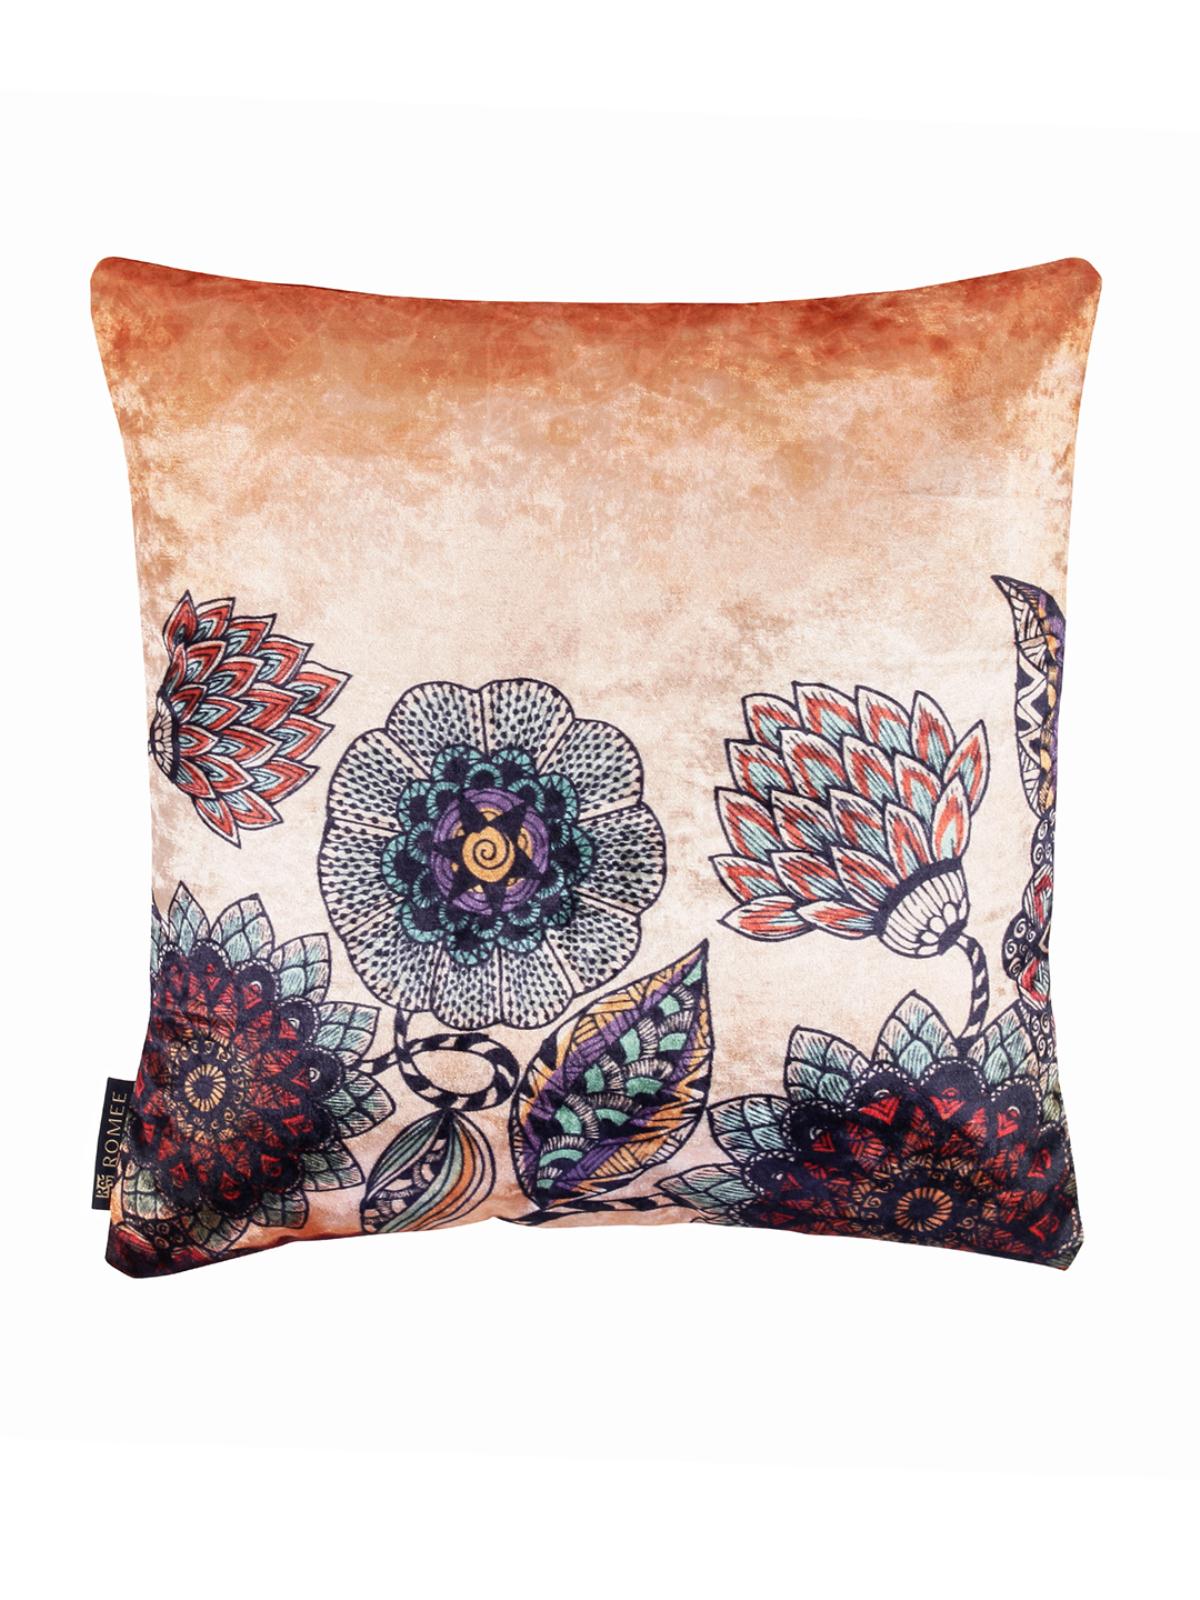 Soft Velvet Floral Print Throw Pillow/Cushion Covers Set of 5, 16x16 inches - Multicolor